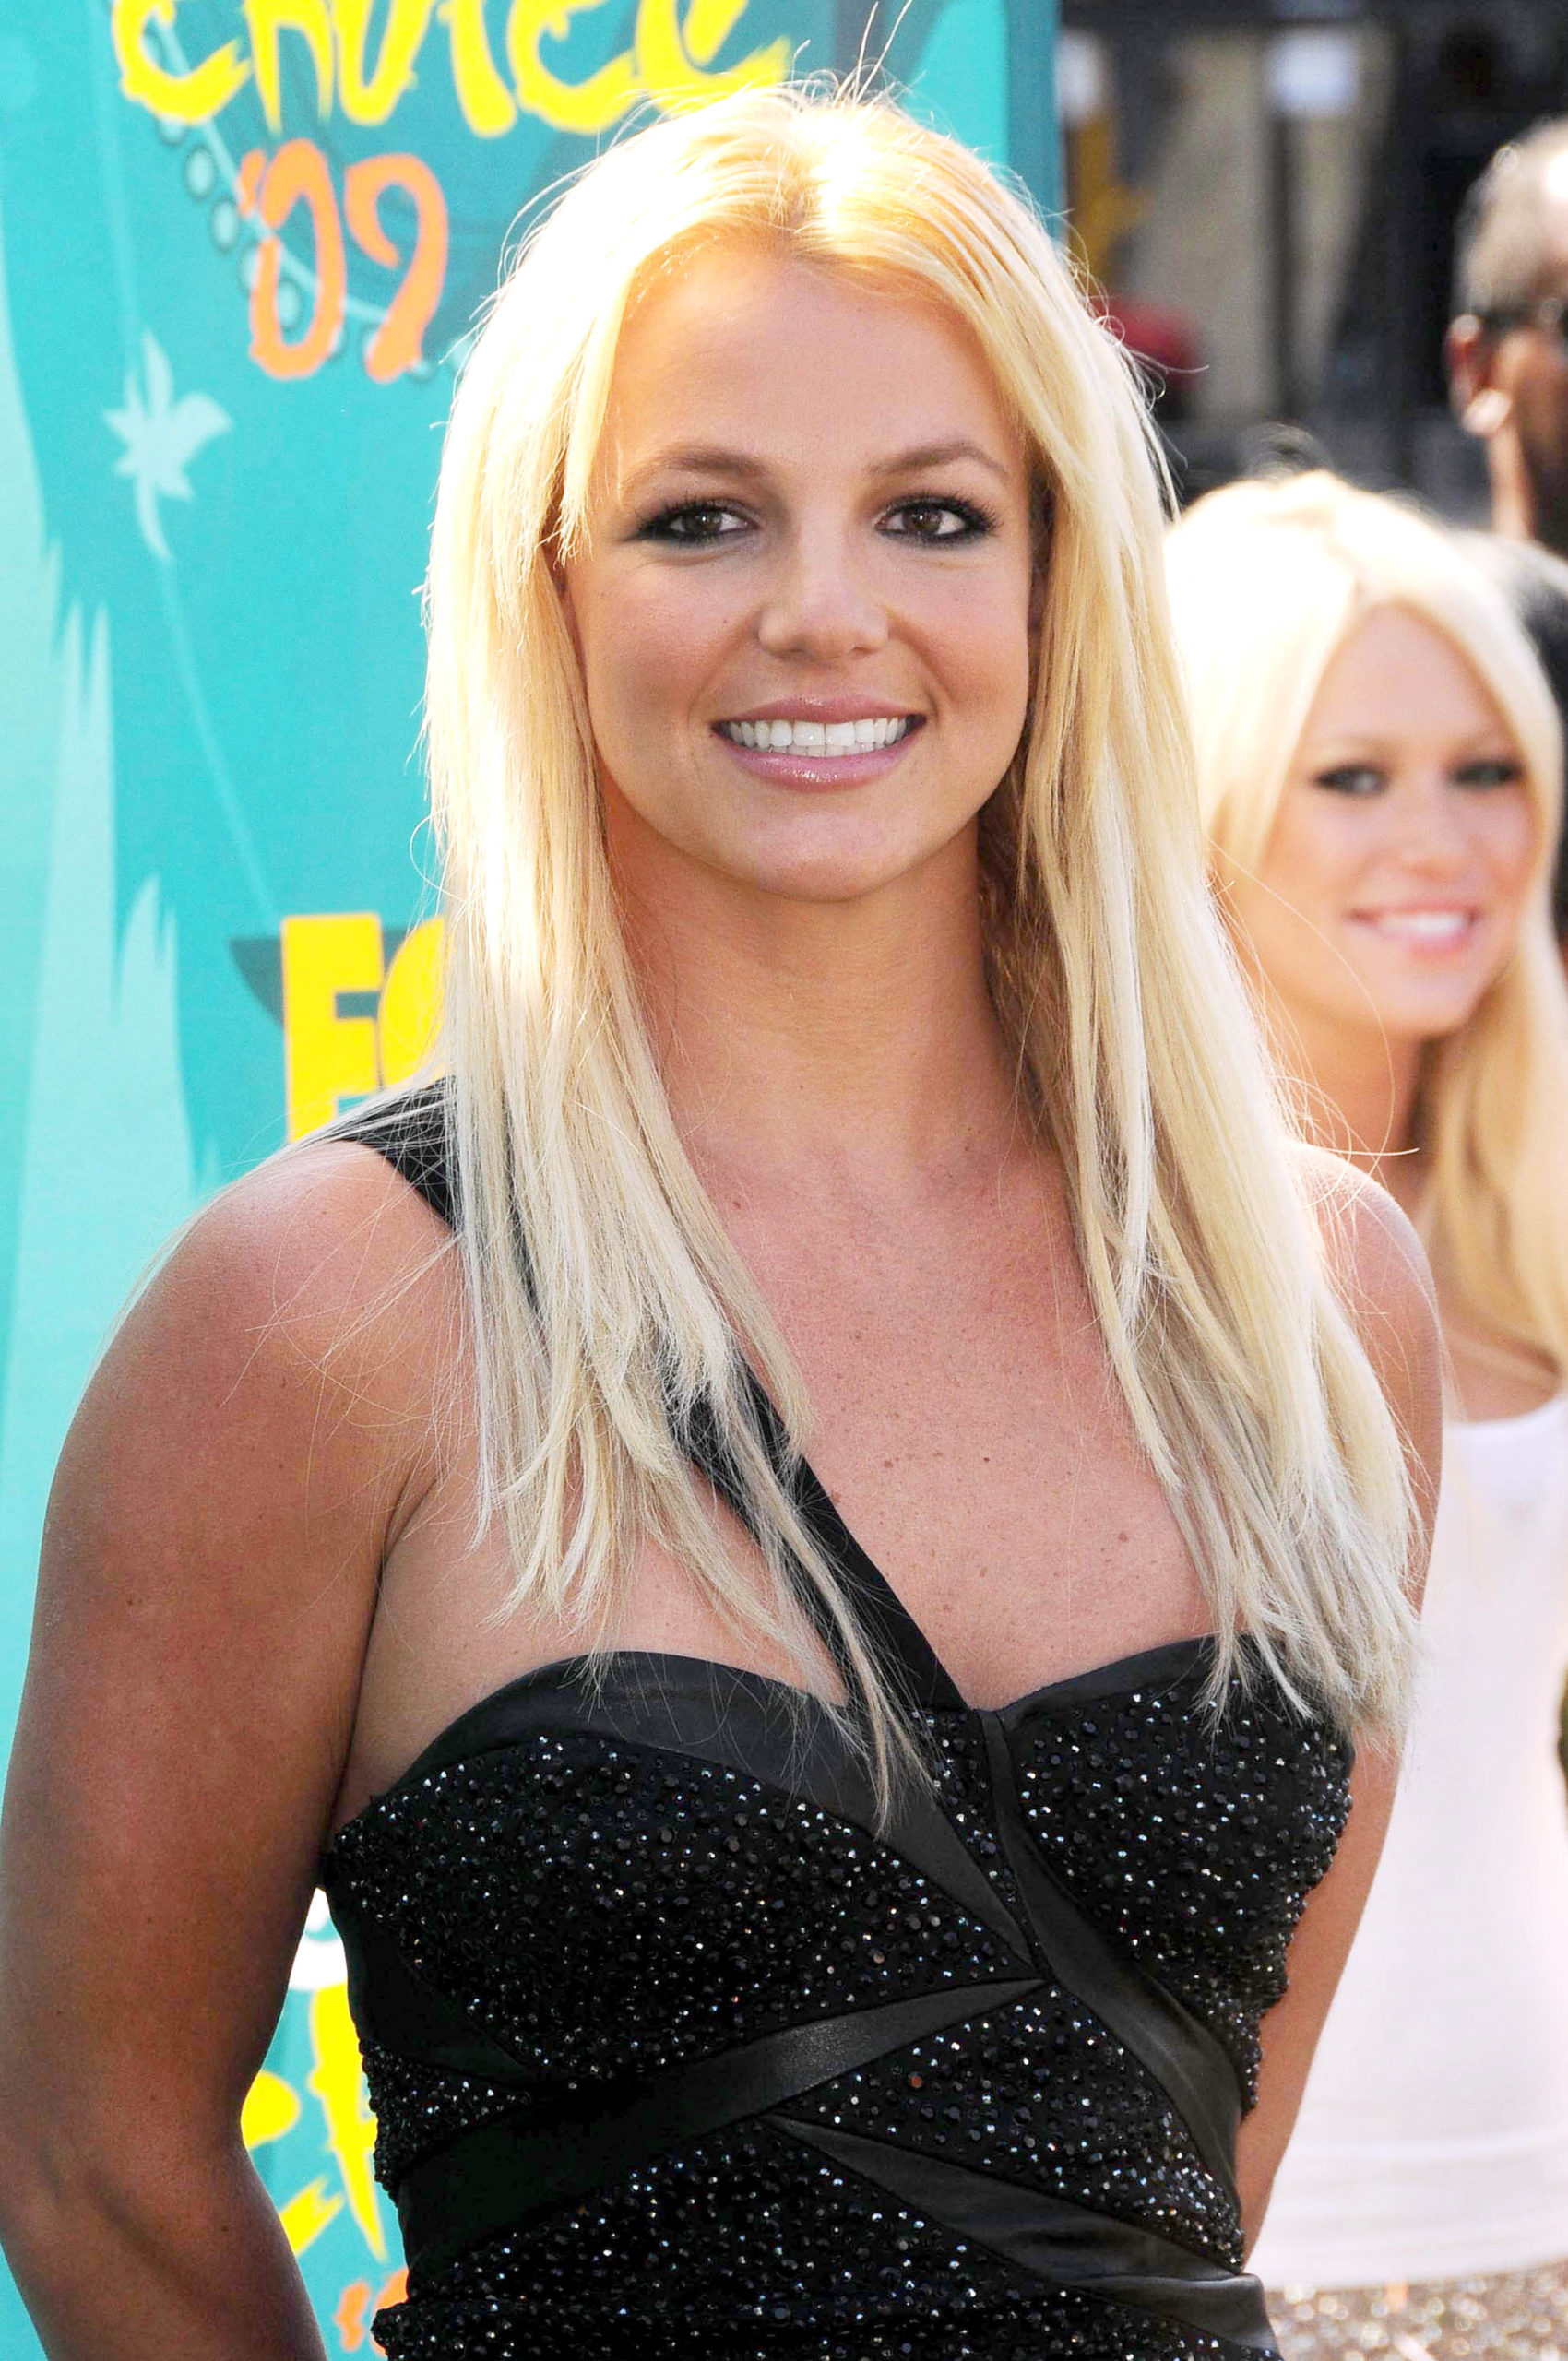 Britney Spears’ father has agreed to step down from the conservatorship